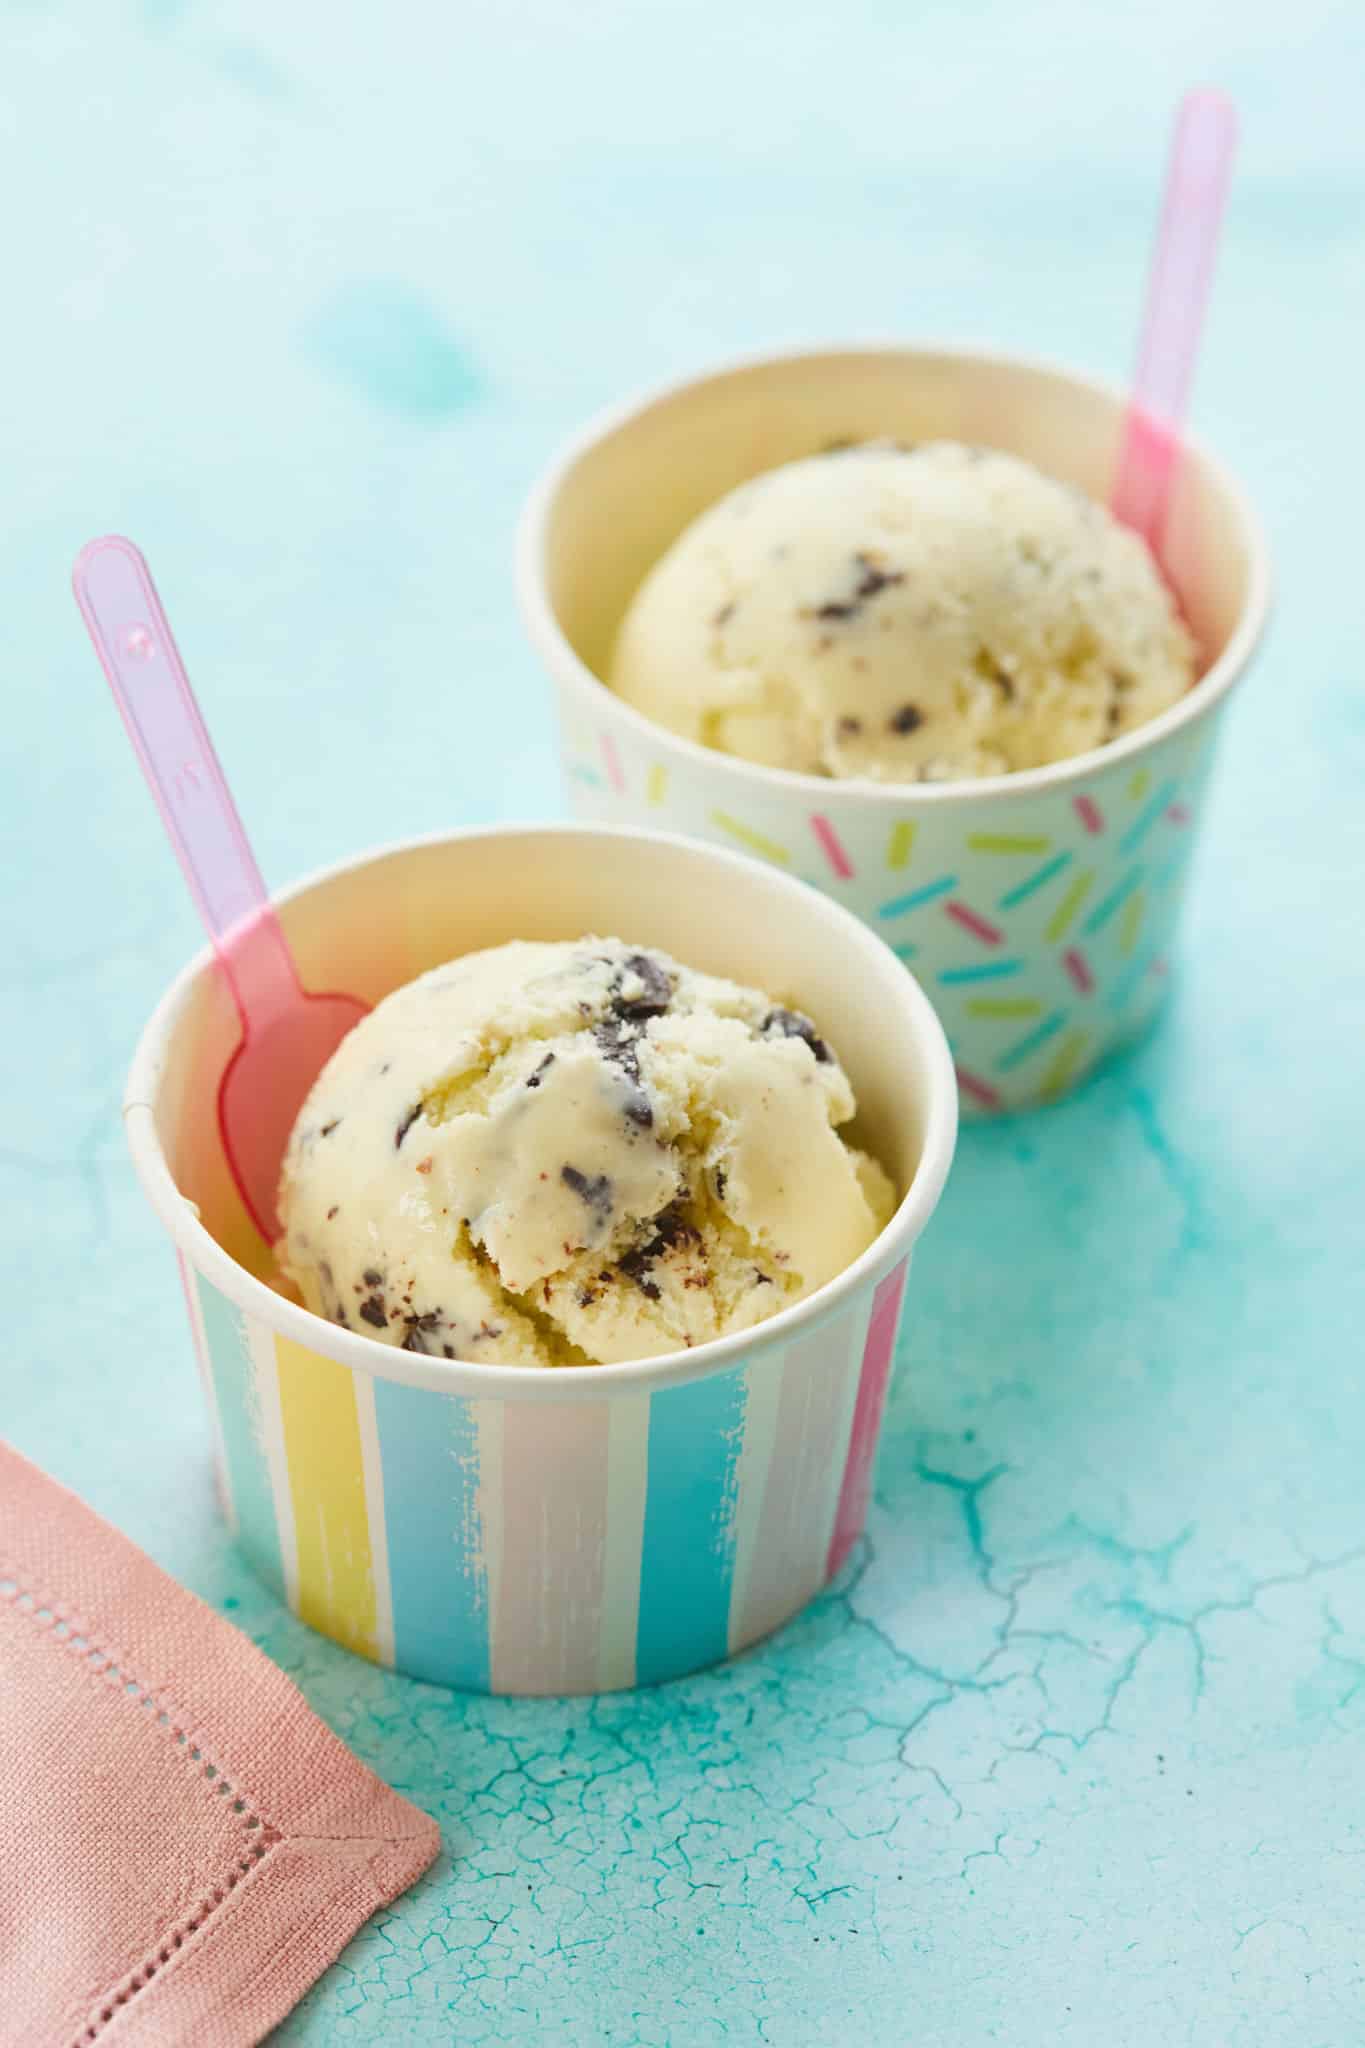 Two servings of my Mint Chocolate Chip Gelato recipe.